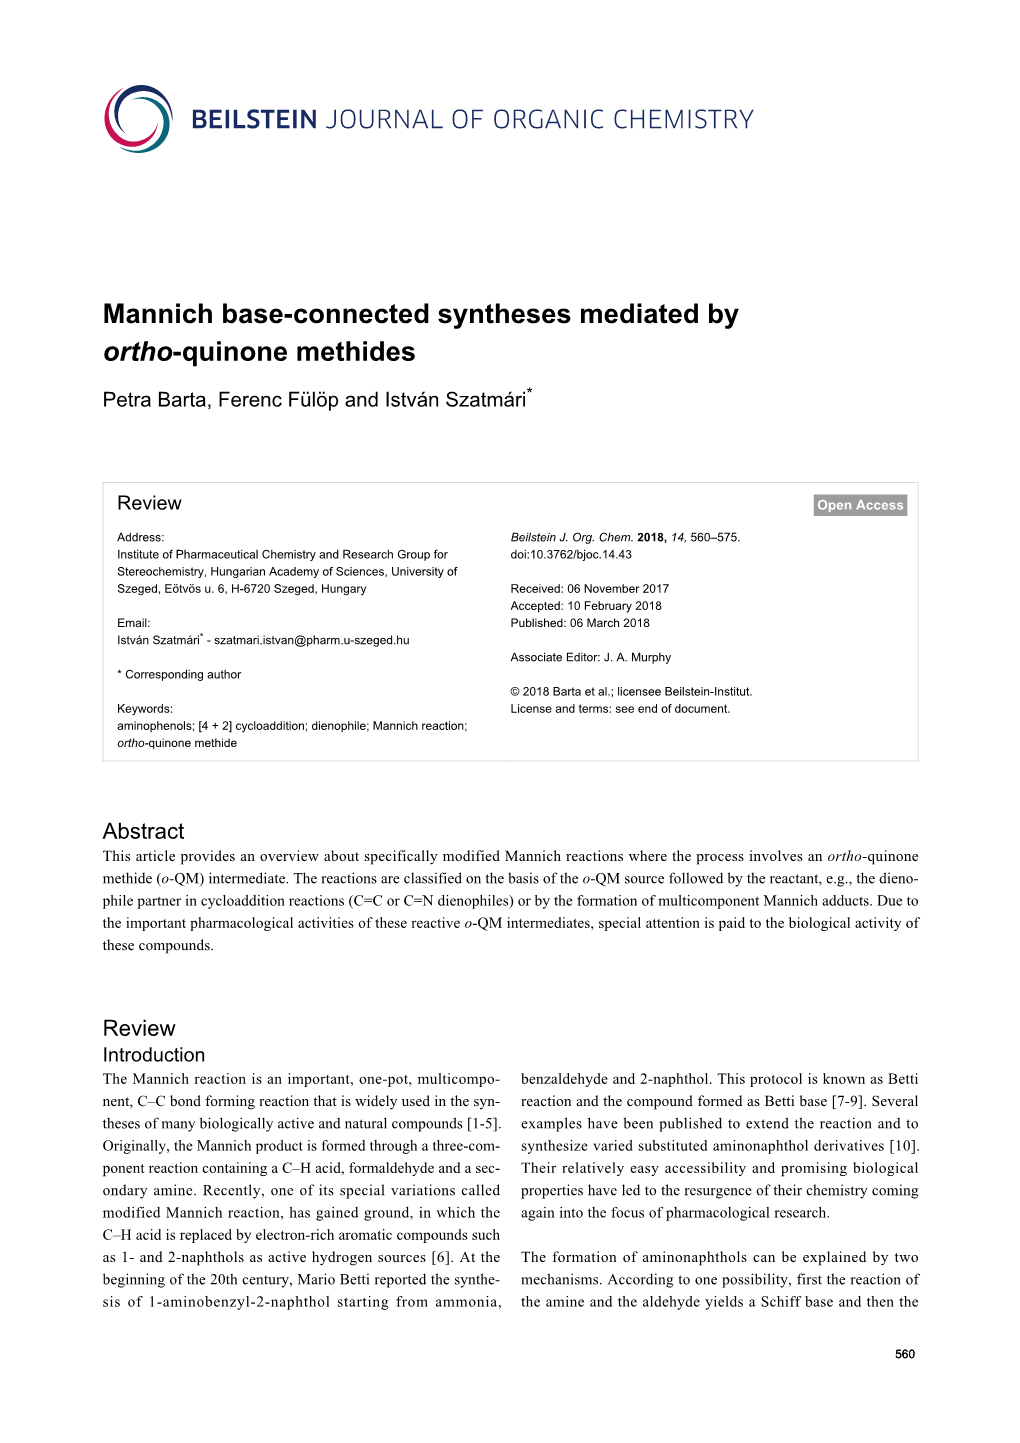 Mannich Base-Connected Syntheses Mediated by Ortho-Quinone Methides